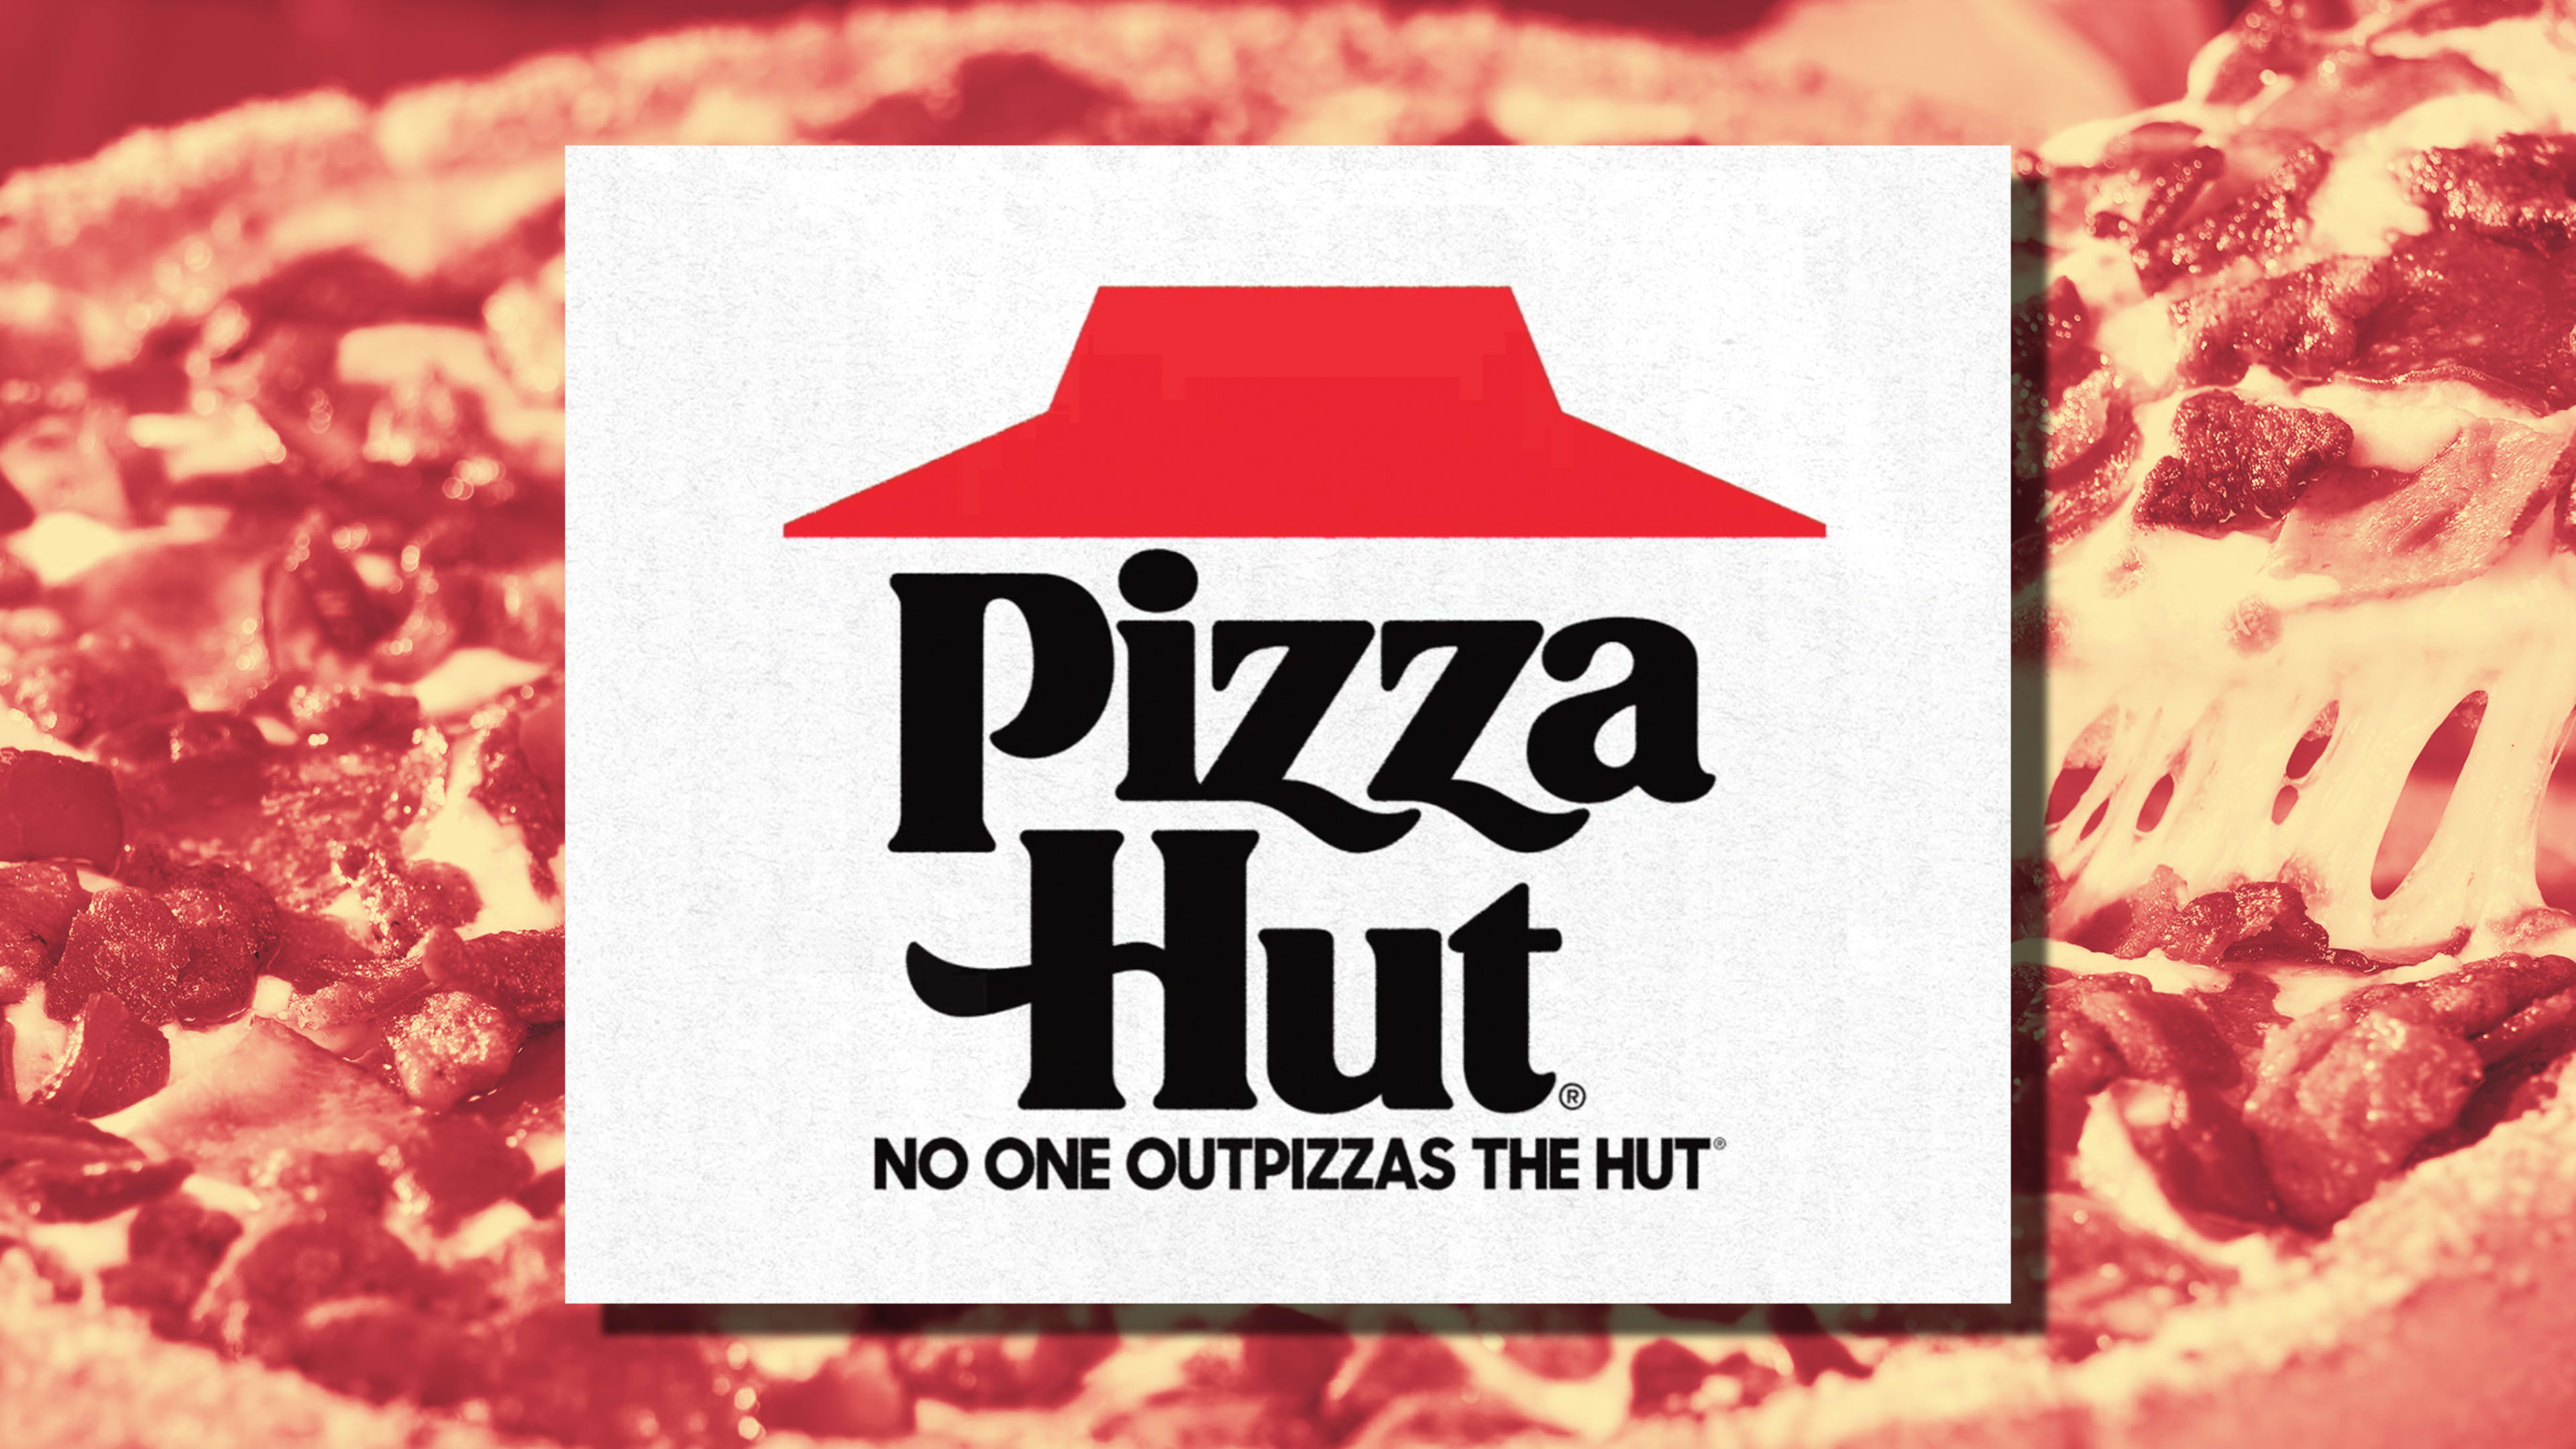 Pizza Hut resurrects its classic logo because it’s awesome